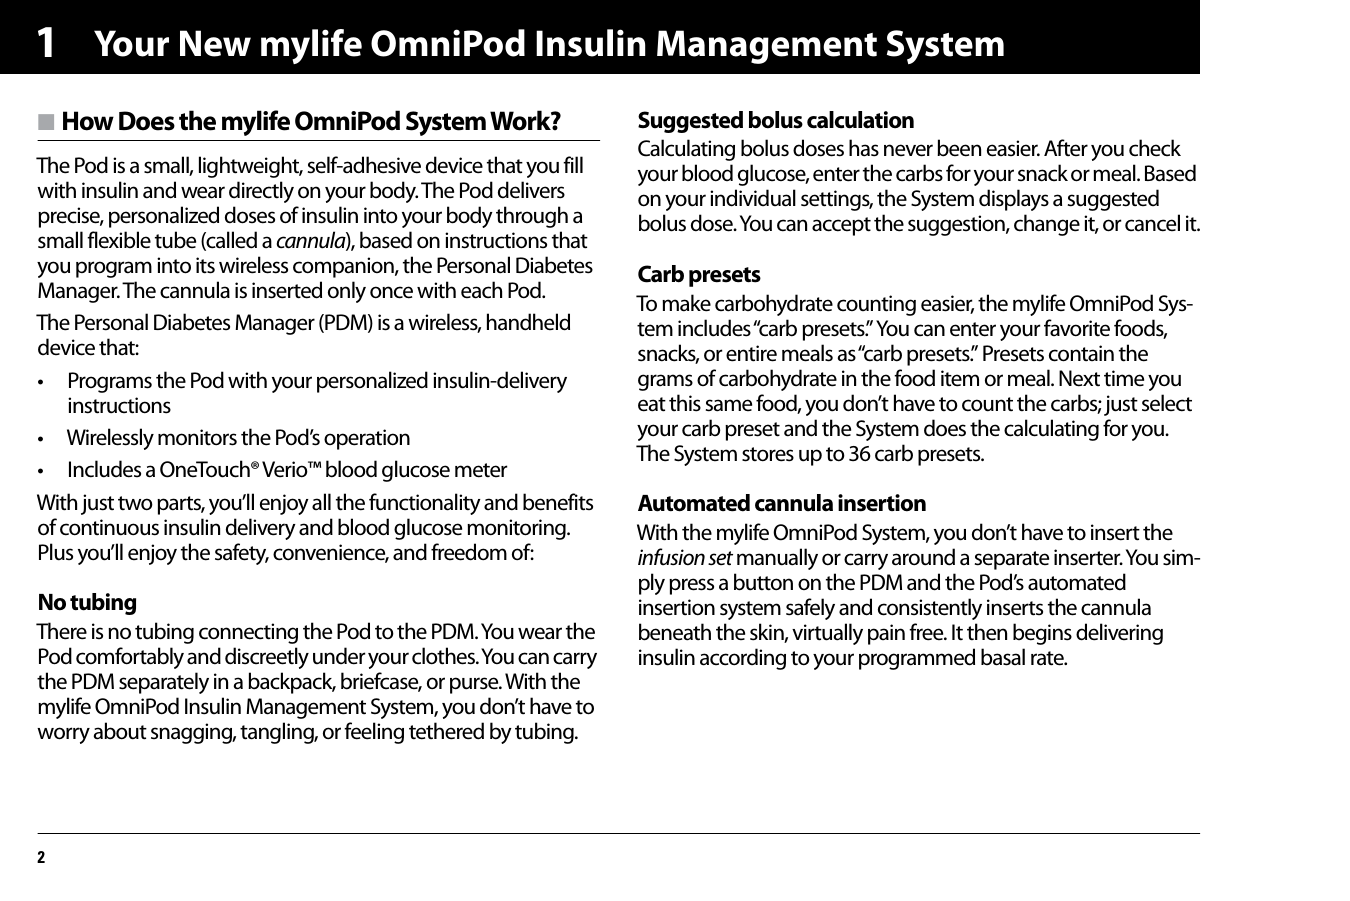 Your New mylife OmniPod Insulin Management System21n How Does the mylife OmniPod System Work?The Pod is a small, lightweight, self-adhesive device that you fill with insulin and wear directly on your body. The Pod delivers precise, personalized doses of insulin into your body through a small flexible tube (called a cannula), based on instructions that you program into its wireless companion, the Personal Diabetes Manager. The cannula is inserted only once with each Pod.The Personal Diabetes Manager (PDM) is a wireless, handheld device that:• Programs the Pod with your personalized insulin-delivery instructions• Wirelessly monitors the Pod’s operation• Includes a OneTouch® Verio™ blood glucose meterWith just two parts, you’ll enjoy all the functionality and benefits of continuous insulin delivery and blood glucose monitoring. Plus you’ll enjoy the safety, convenience, and freedom of:No tubingThere is no tubing connecting the Pod to the PDM. You wear the Pod comfortably and discreetly under your clothes. You can carry the PDM separately in a backpack, briefcase, or purse. With the mylife OmniPod Insulin Management System, you don’t have to worry about snagging, tangling, or feeling tethered by tubing.Suggested bolus calculationCalculating bolus doses has never been easier. After you check your blood glucose, enter the carbs for your snack or meal. Based on your individual settings, the System displays a suggested bolus dose. You can accept the suggestion, change it, or cancel it.Carb presetsTo make carbohydrate counting easier, the mylife OmniPod Sys-tem includes “carb presets.” You can enter your favorite foods, snacks, or entire meals as “carb presets.” Presets contain the grams of carbohydrate in the food item or meal. Next time you eat this same food, you don’t have to count the carbs; just select your carb preset and the System does the calculating for you. The System stores up to 36 carb presets.Automated cannula insertionWith the mylife OmniPod System, you don’t have to insert the infusion set manually or carry around a separate inserter. You sim-ply press a button on the PDM and the Pod’s automated insertion system safely and consistently inserts the cannula beneath the skin, virtually pain free. It then begins delivering insulin according to your programmed basal rate.